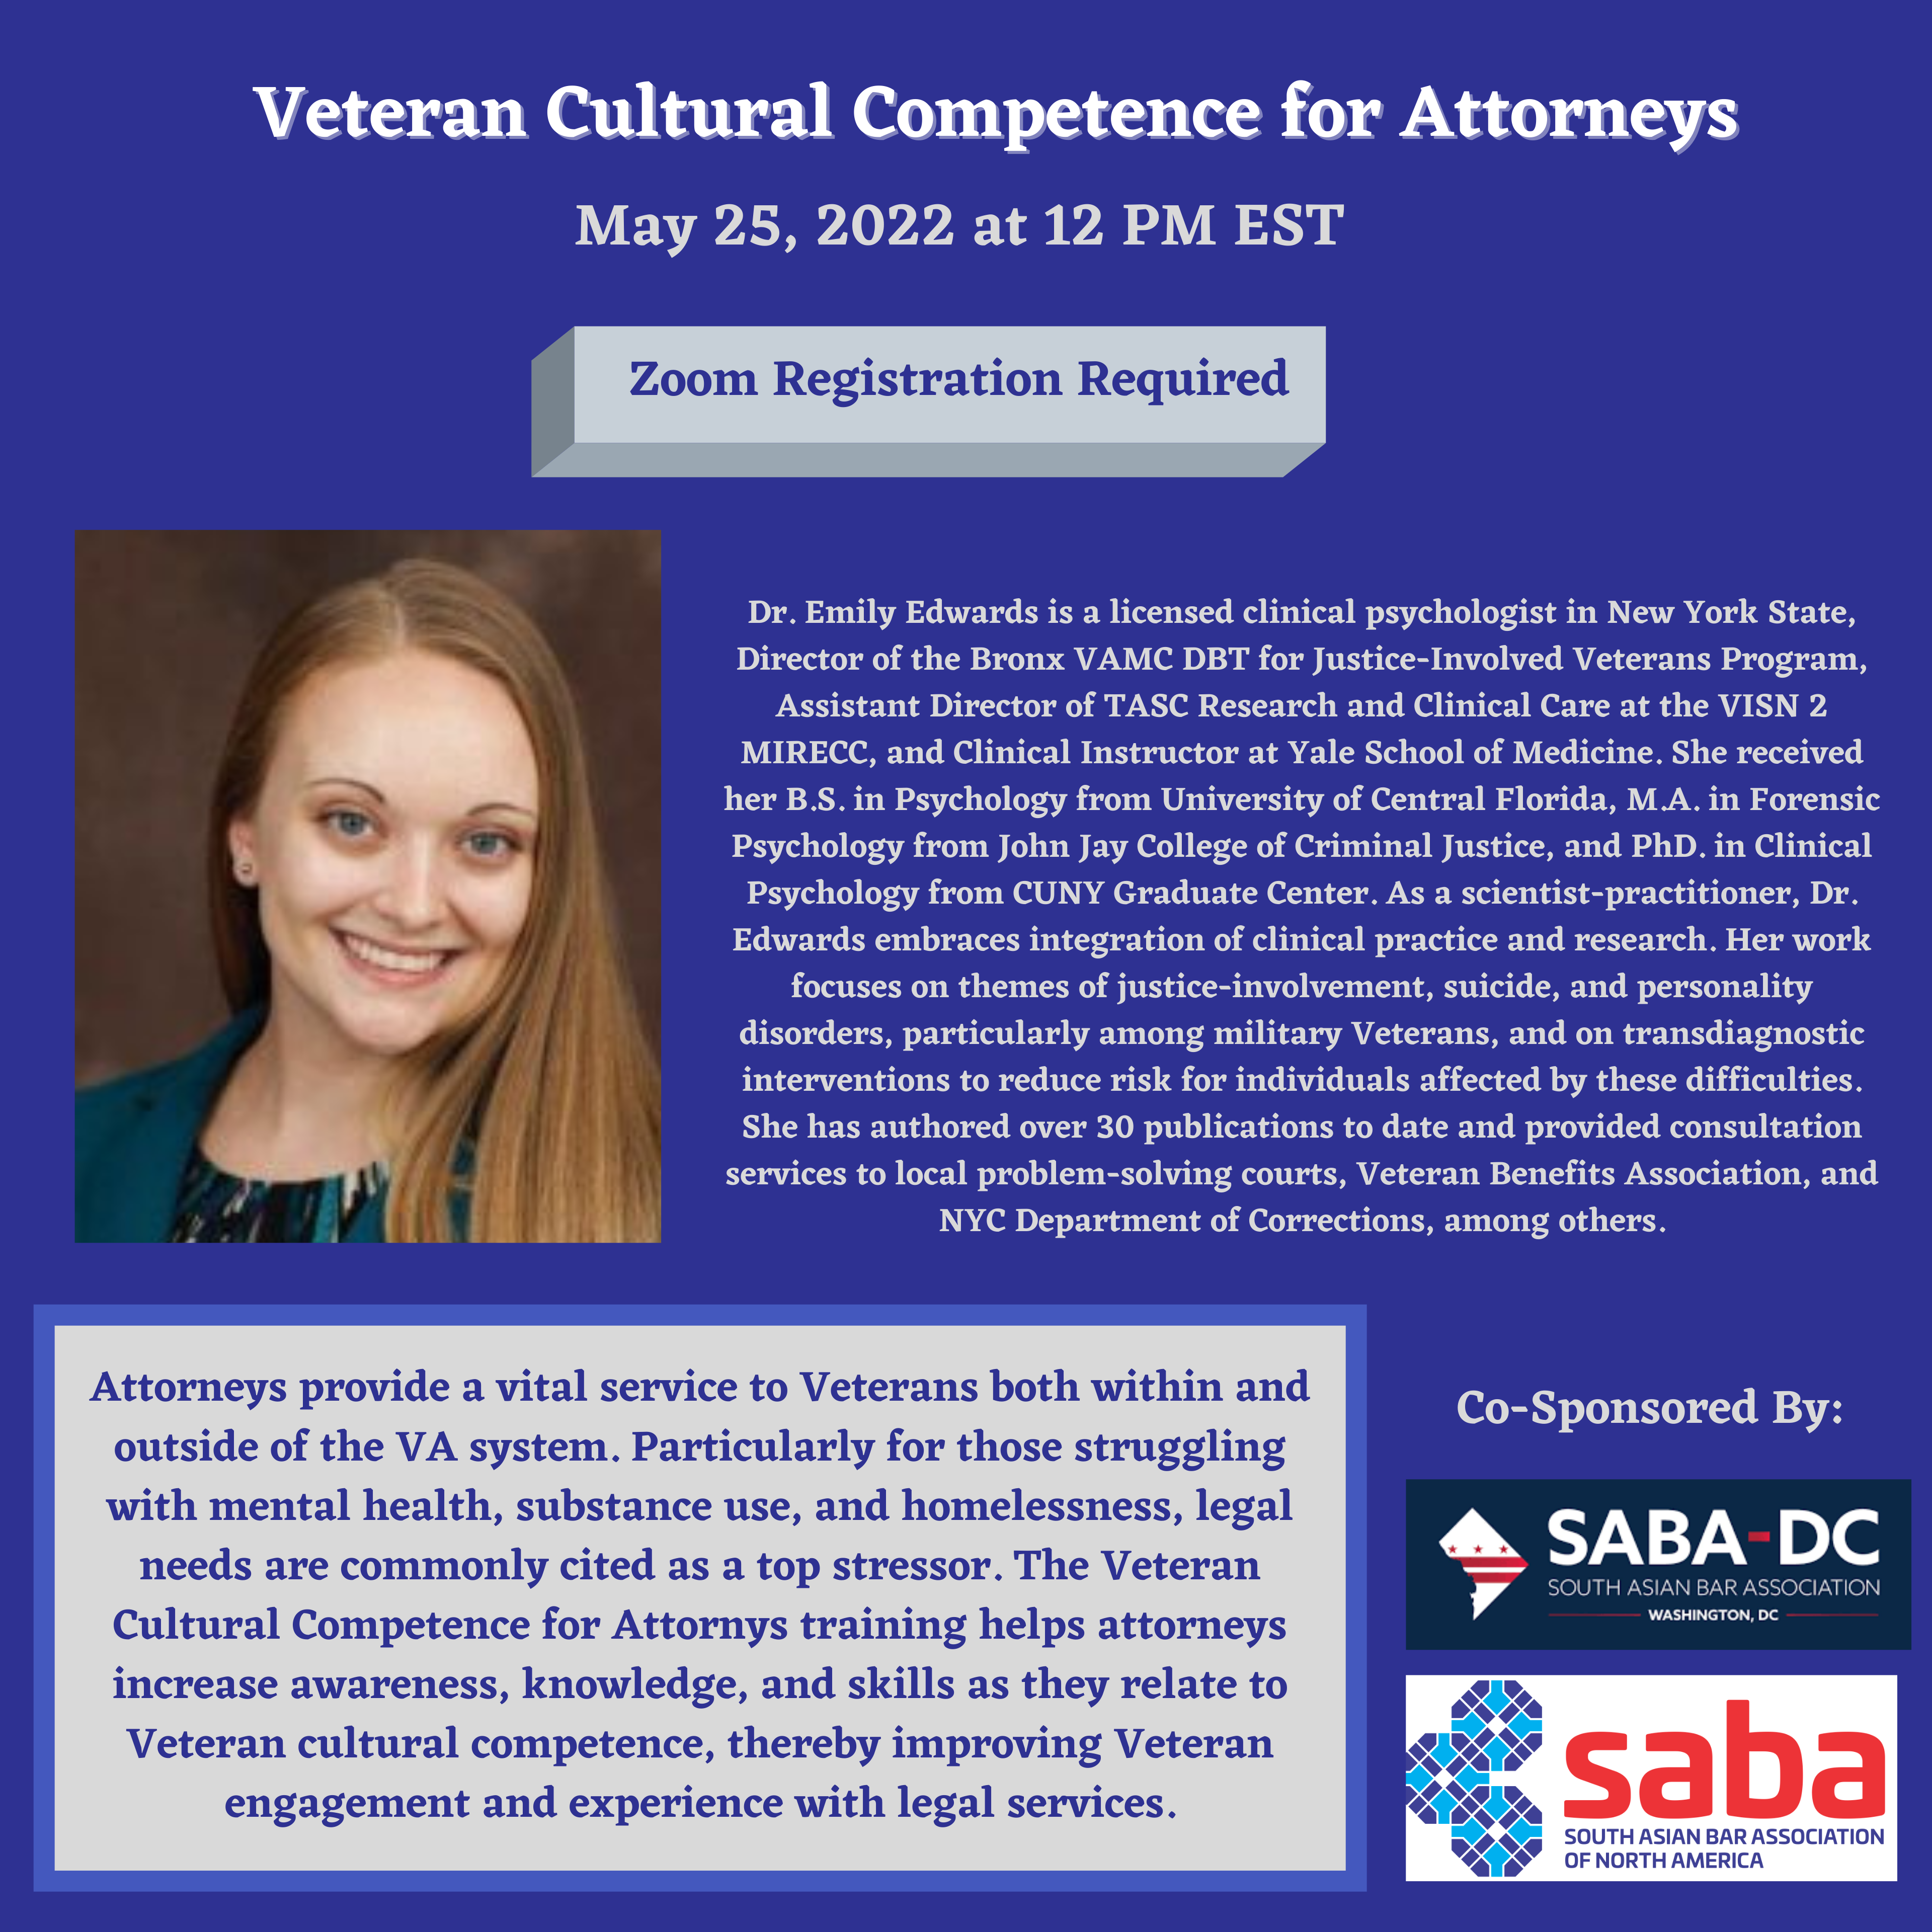 Veterans Cultural Competence for Attorneys Flyer (1)